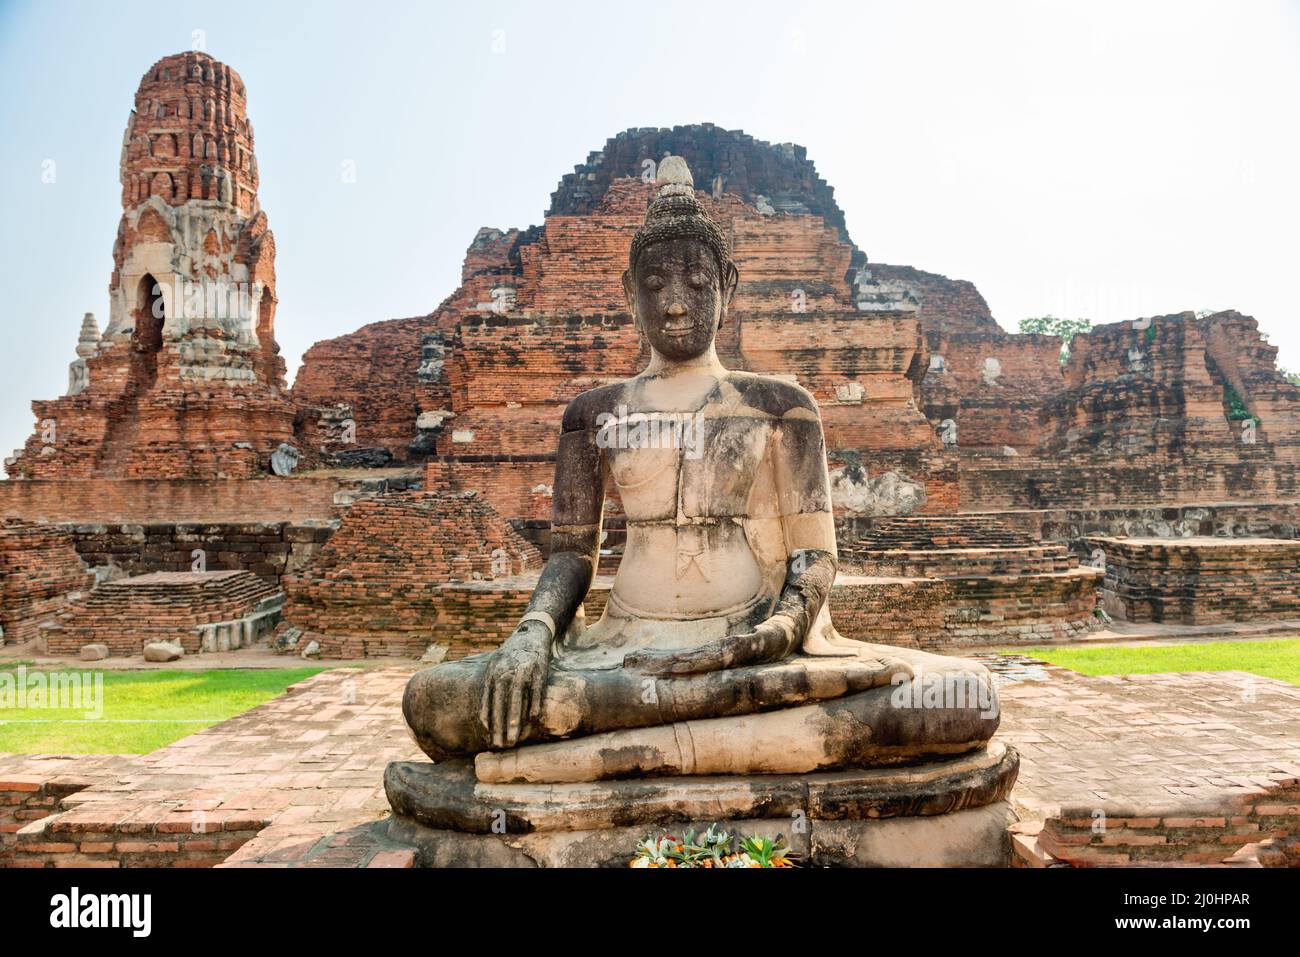 Ruins of old historical and religious capital Ayutthaya in Thailand Stock Photo